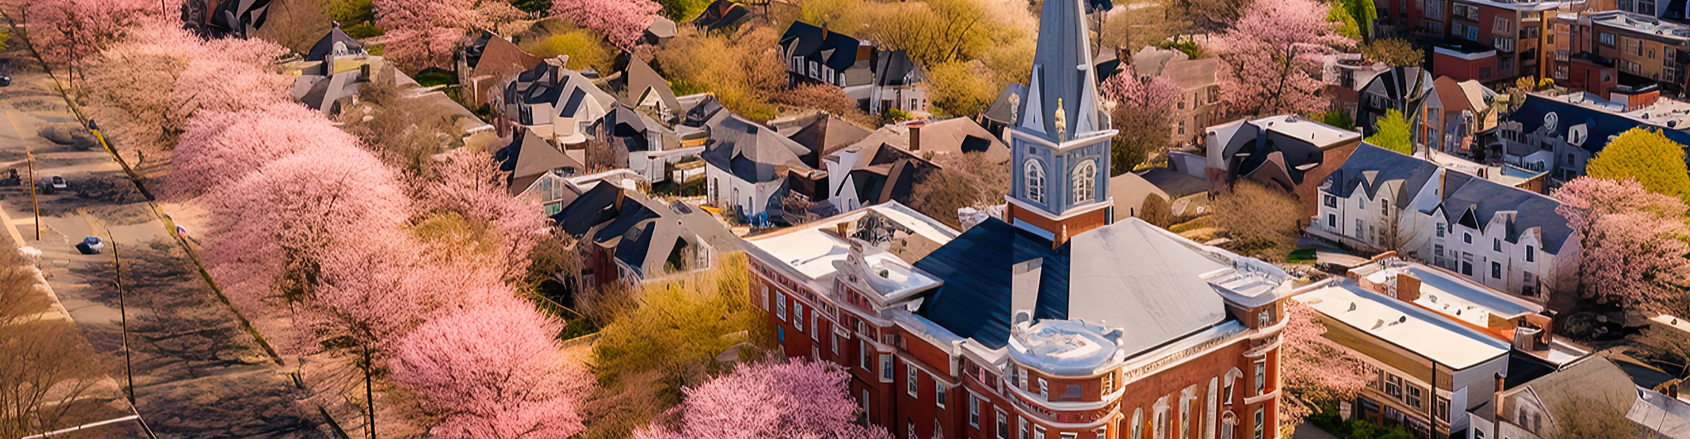 An aerial view of a city with pink blossoming trees.